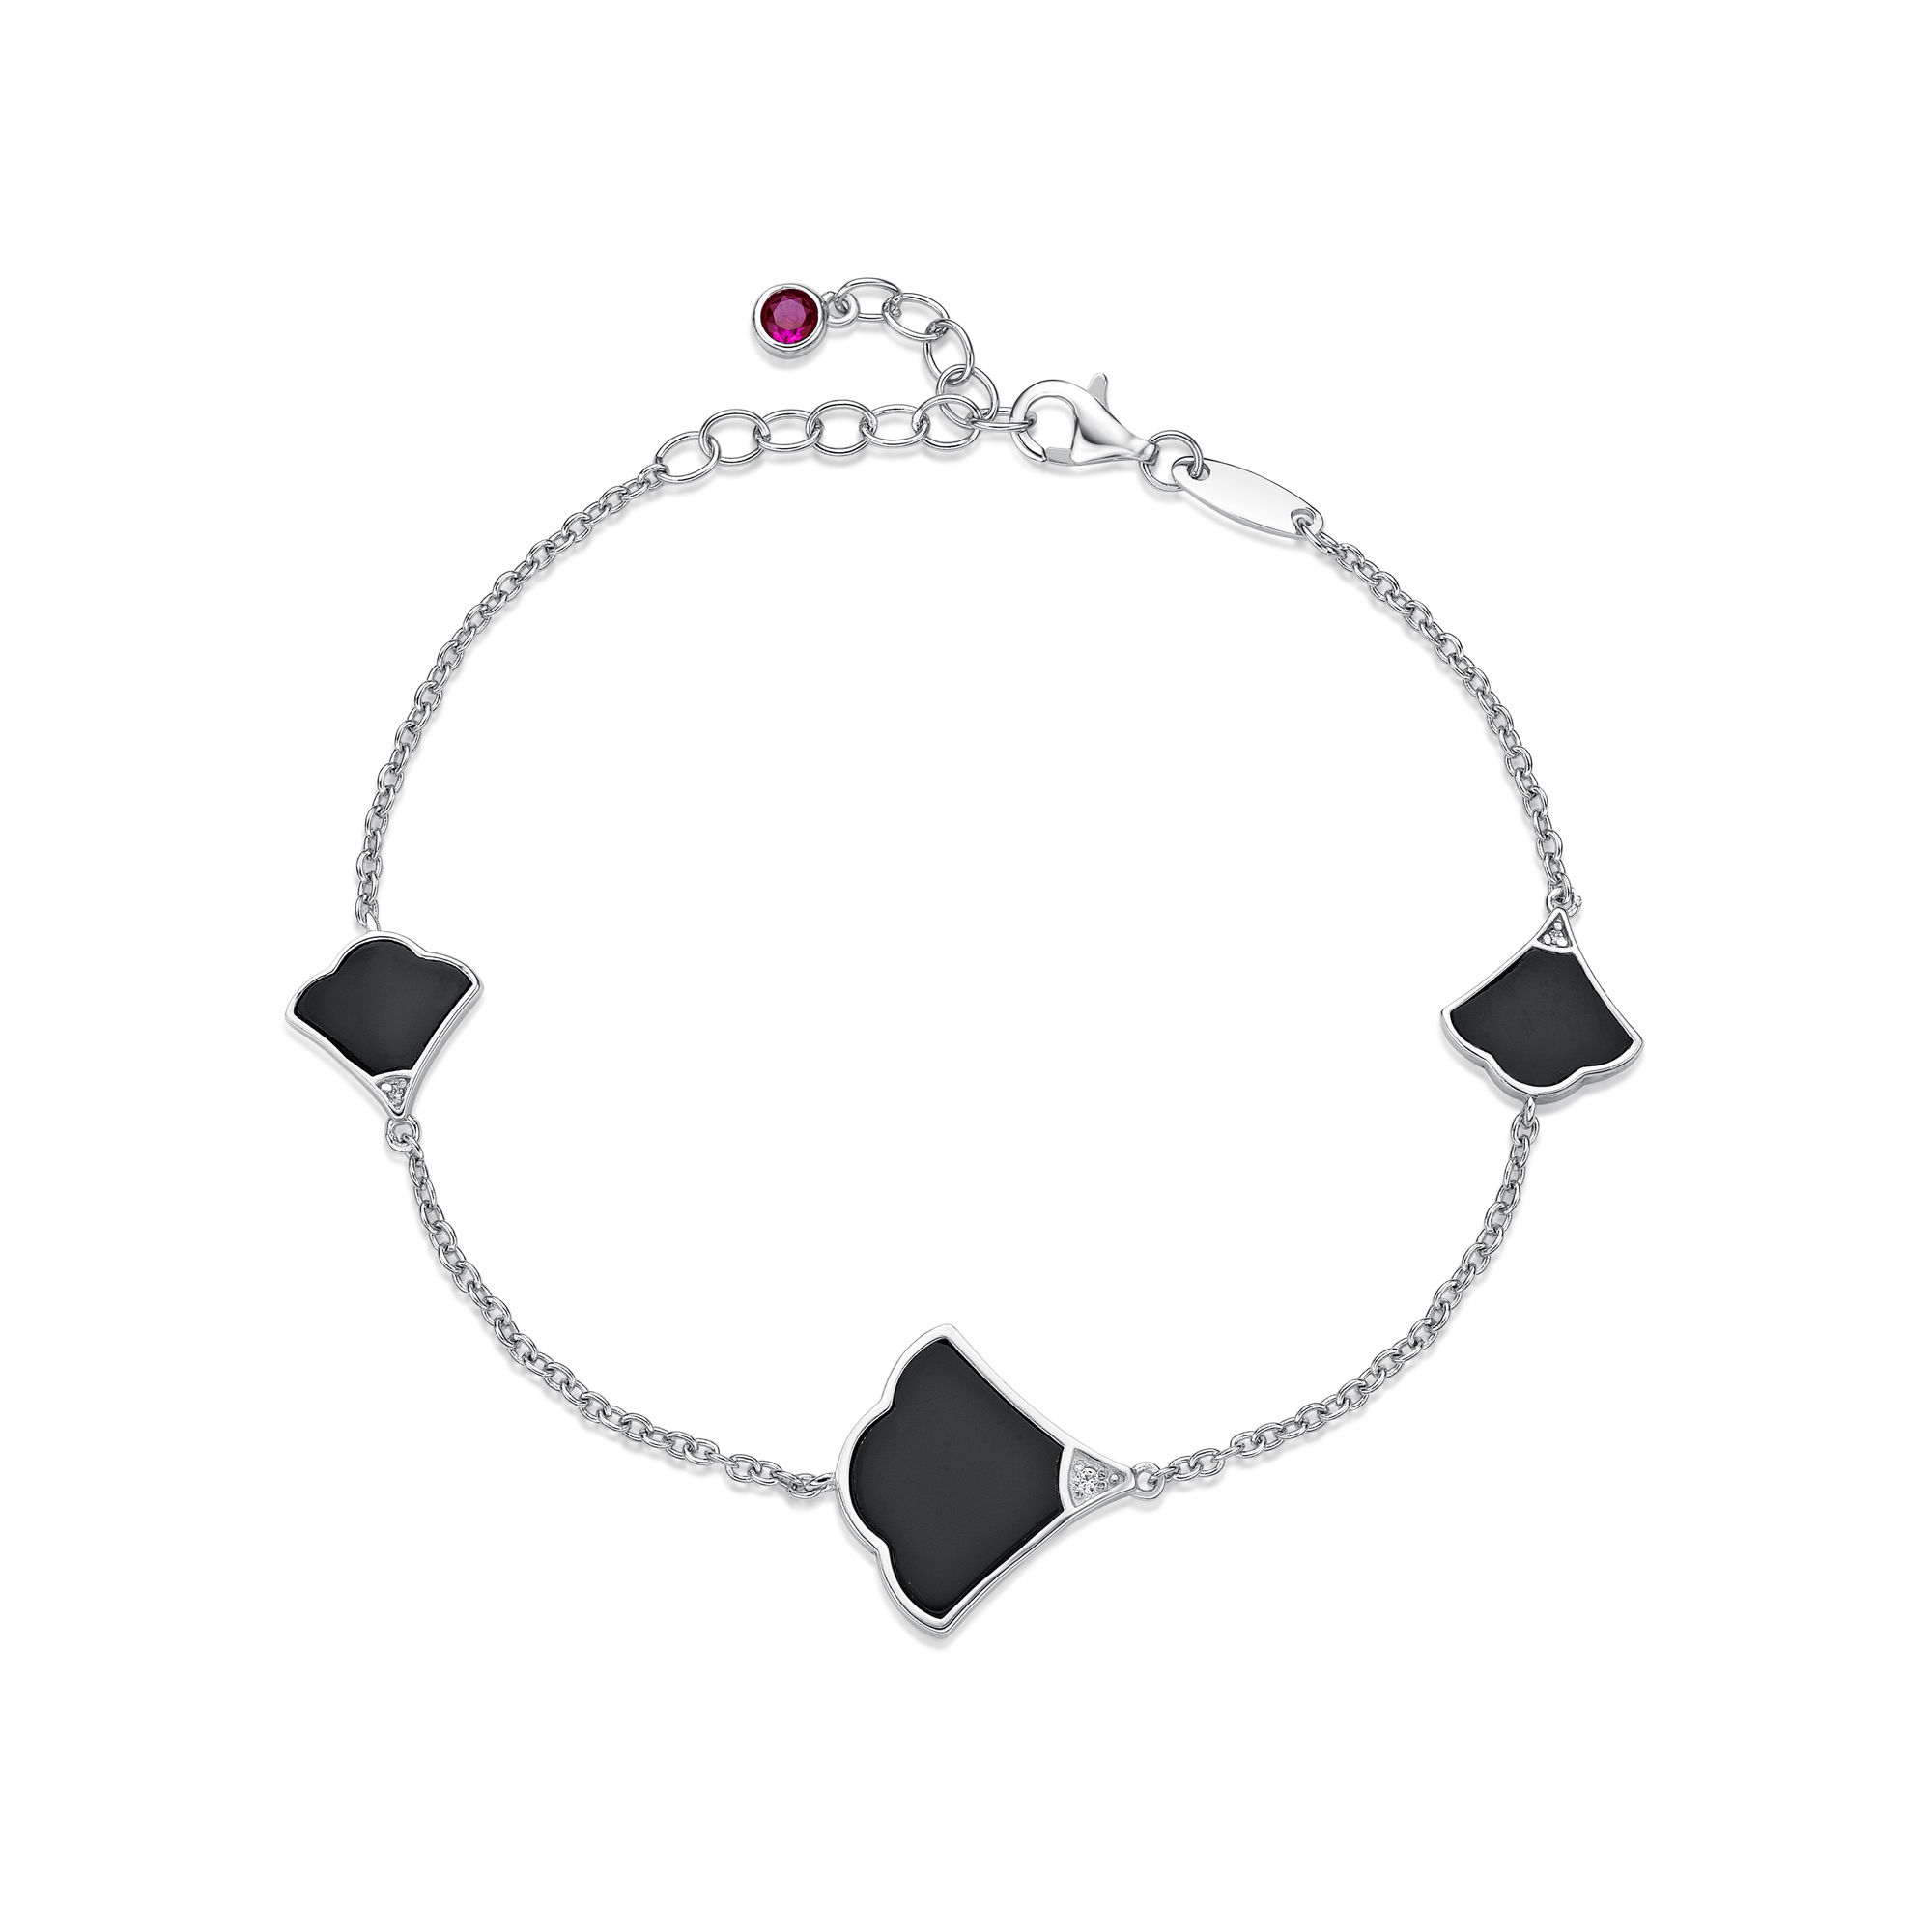 Women's Black Onyx Three Fan Bracelet with Lobster Clasp, 925 Sterling Silver, 8 Inches - Prima Donna | Lavari Jewelers